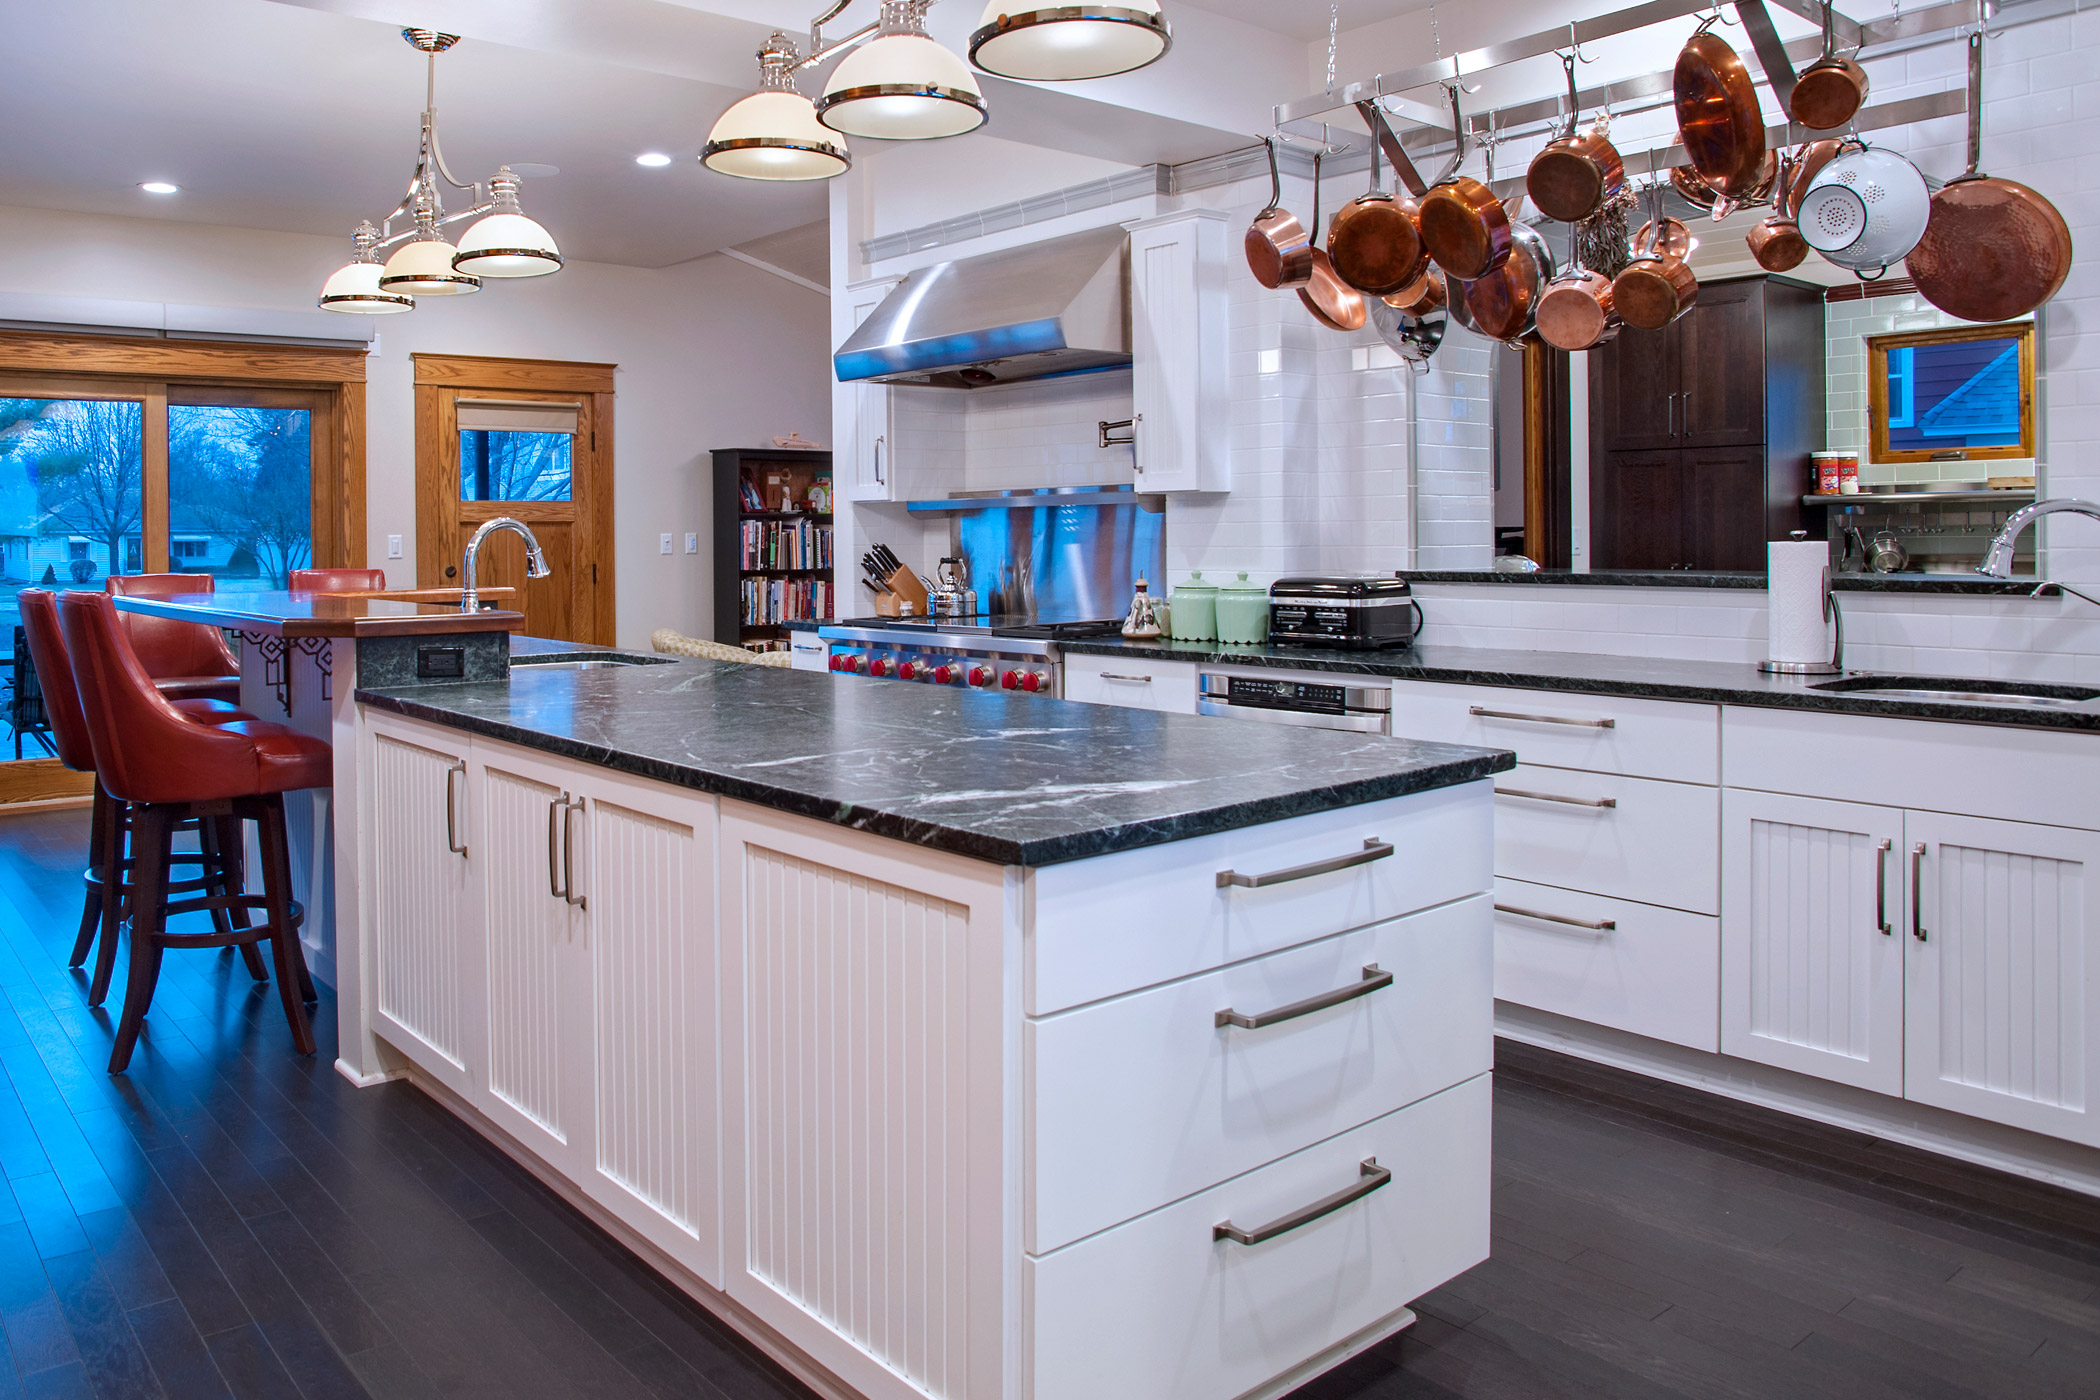 Furniture-Grade Kitchen Cabinets, R.D. Henry & Co. Line, Custom Sizes,  Kitchen Remodel, Highly Crafted Cabinet Doors, Beautiful Cabinetry, RD  Henry Evoke, Customized Paint Match, Specific Hue, Artisanal Glaze, Door,  Furniture-Grade Kitchen Cabinets